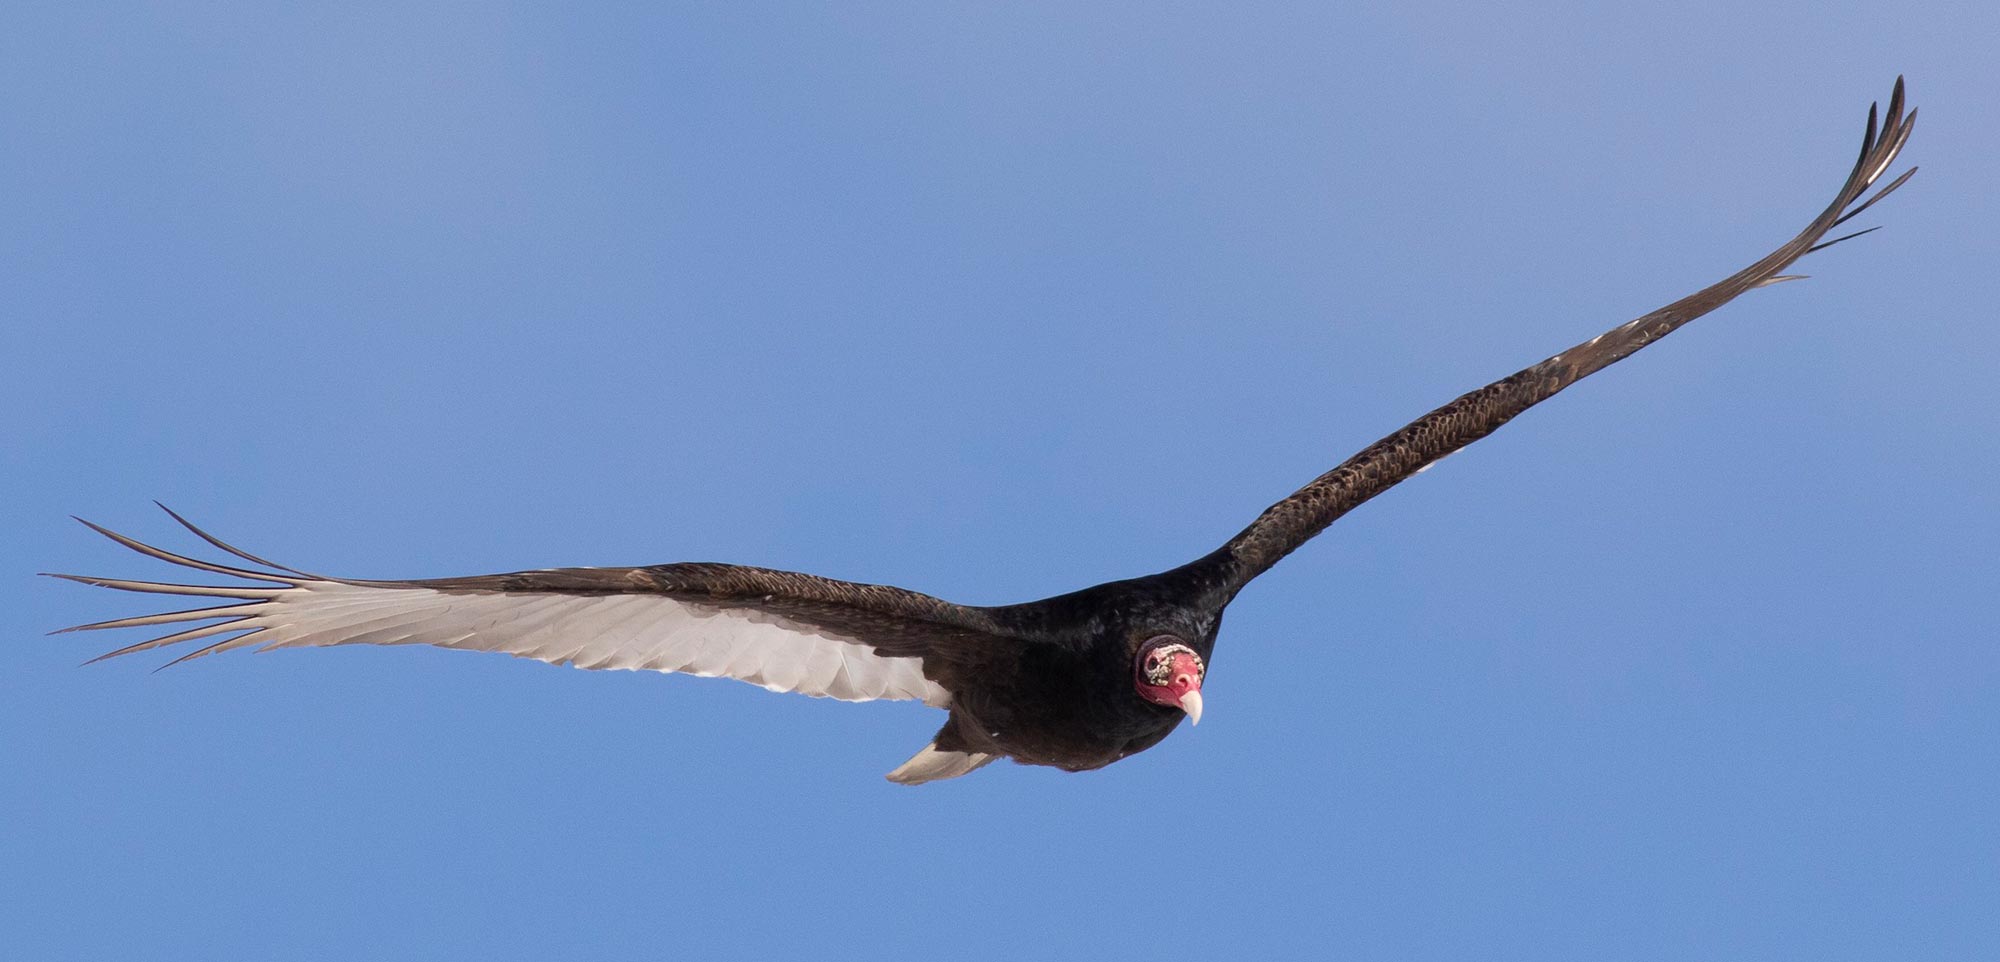 Example of typical Turkey Vulture posture